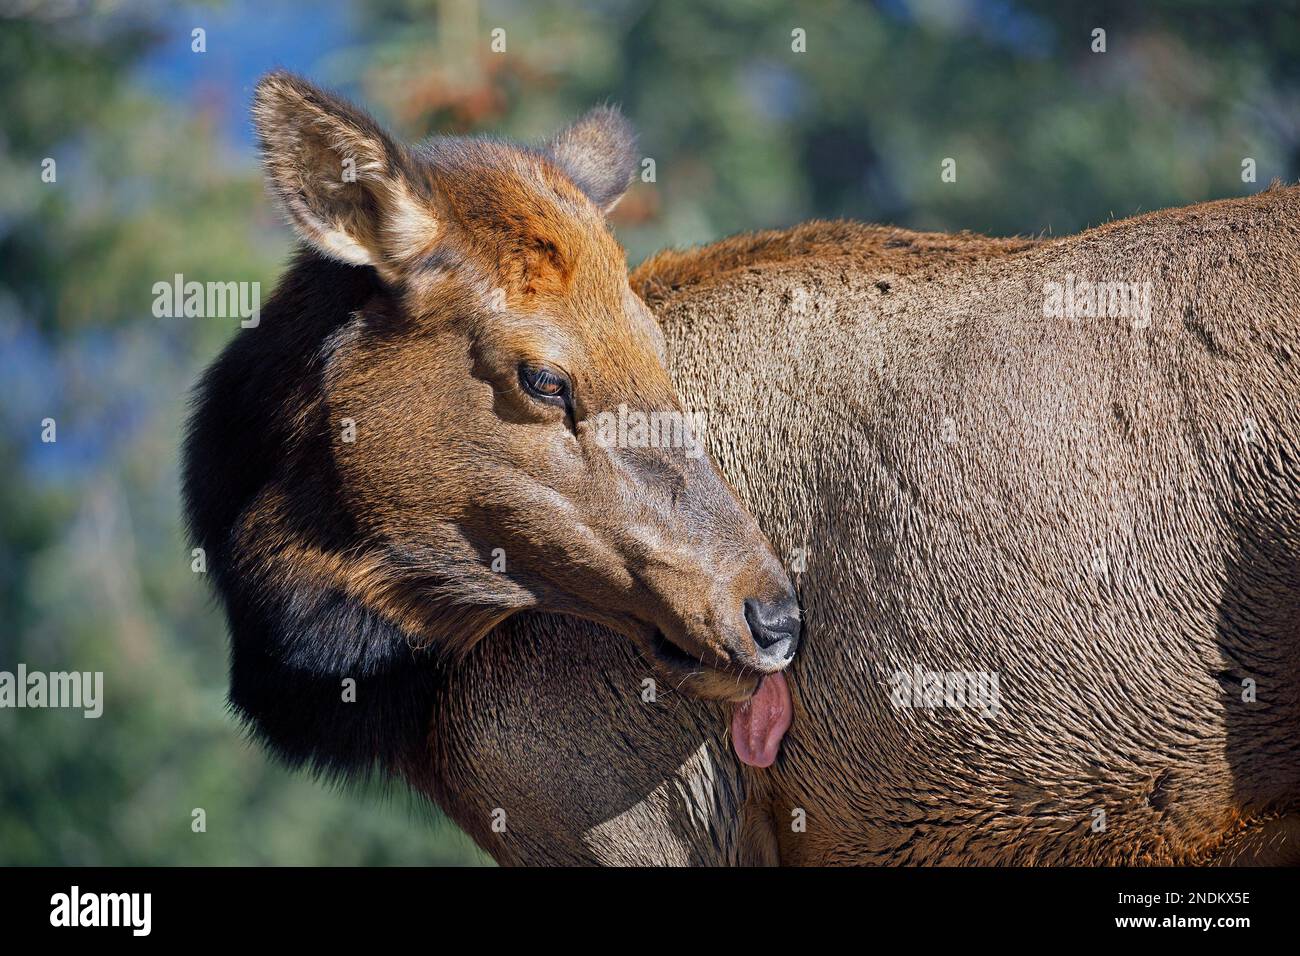 Female elk grooming, licking herself with tongue out. Jasper National Park, Alberta, Canada. Cervus canadensis Stock Photo